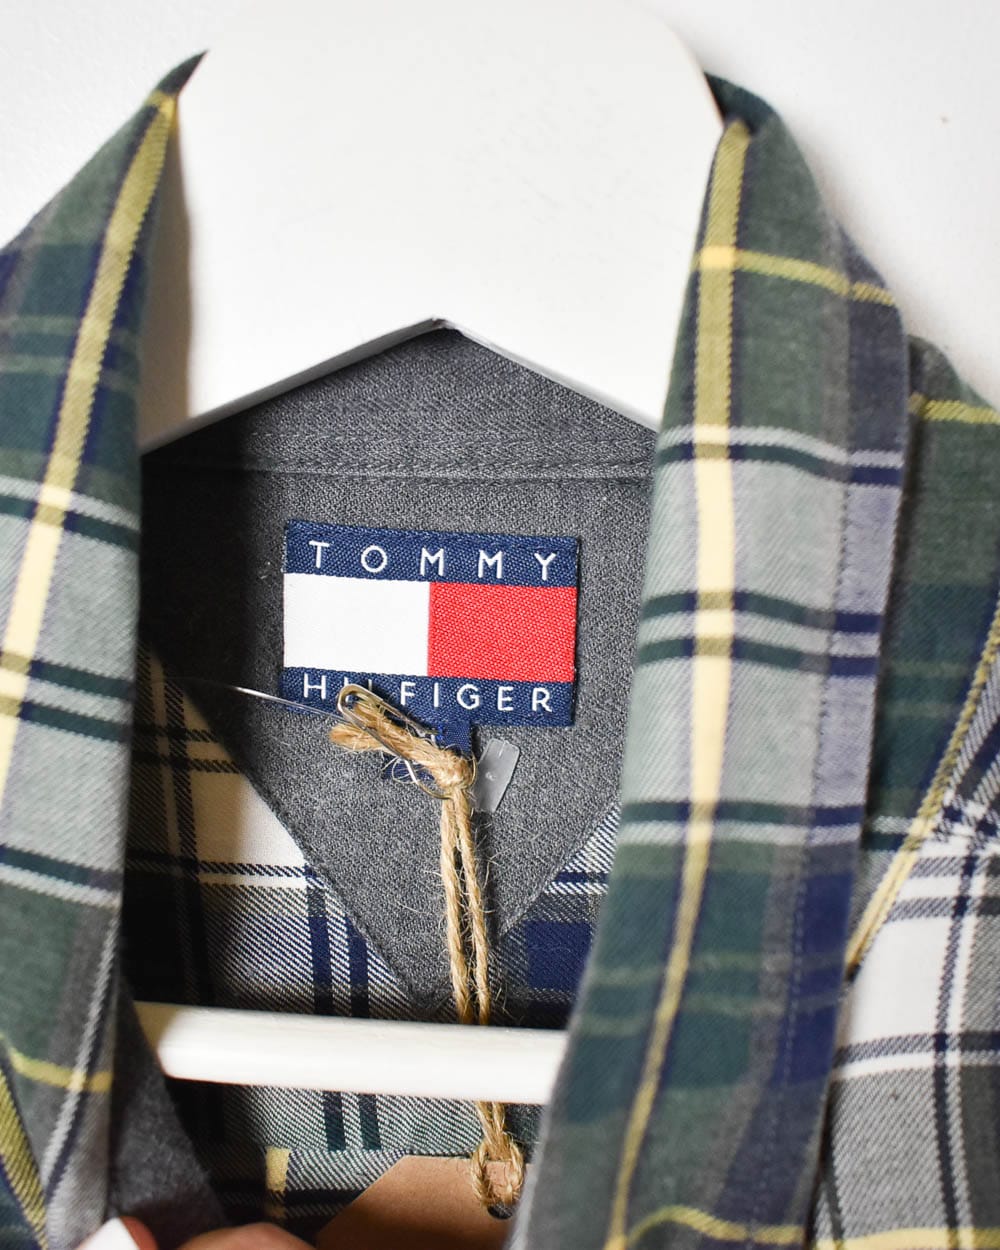 Navy Tommy Hilfiger Flannel Shirt - X-Large